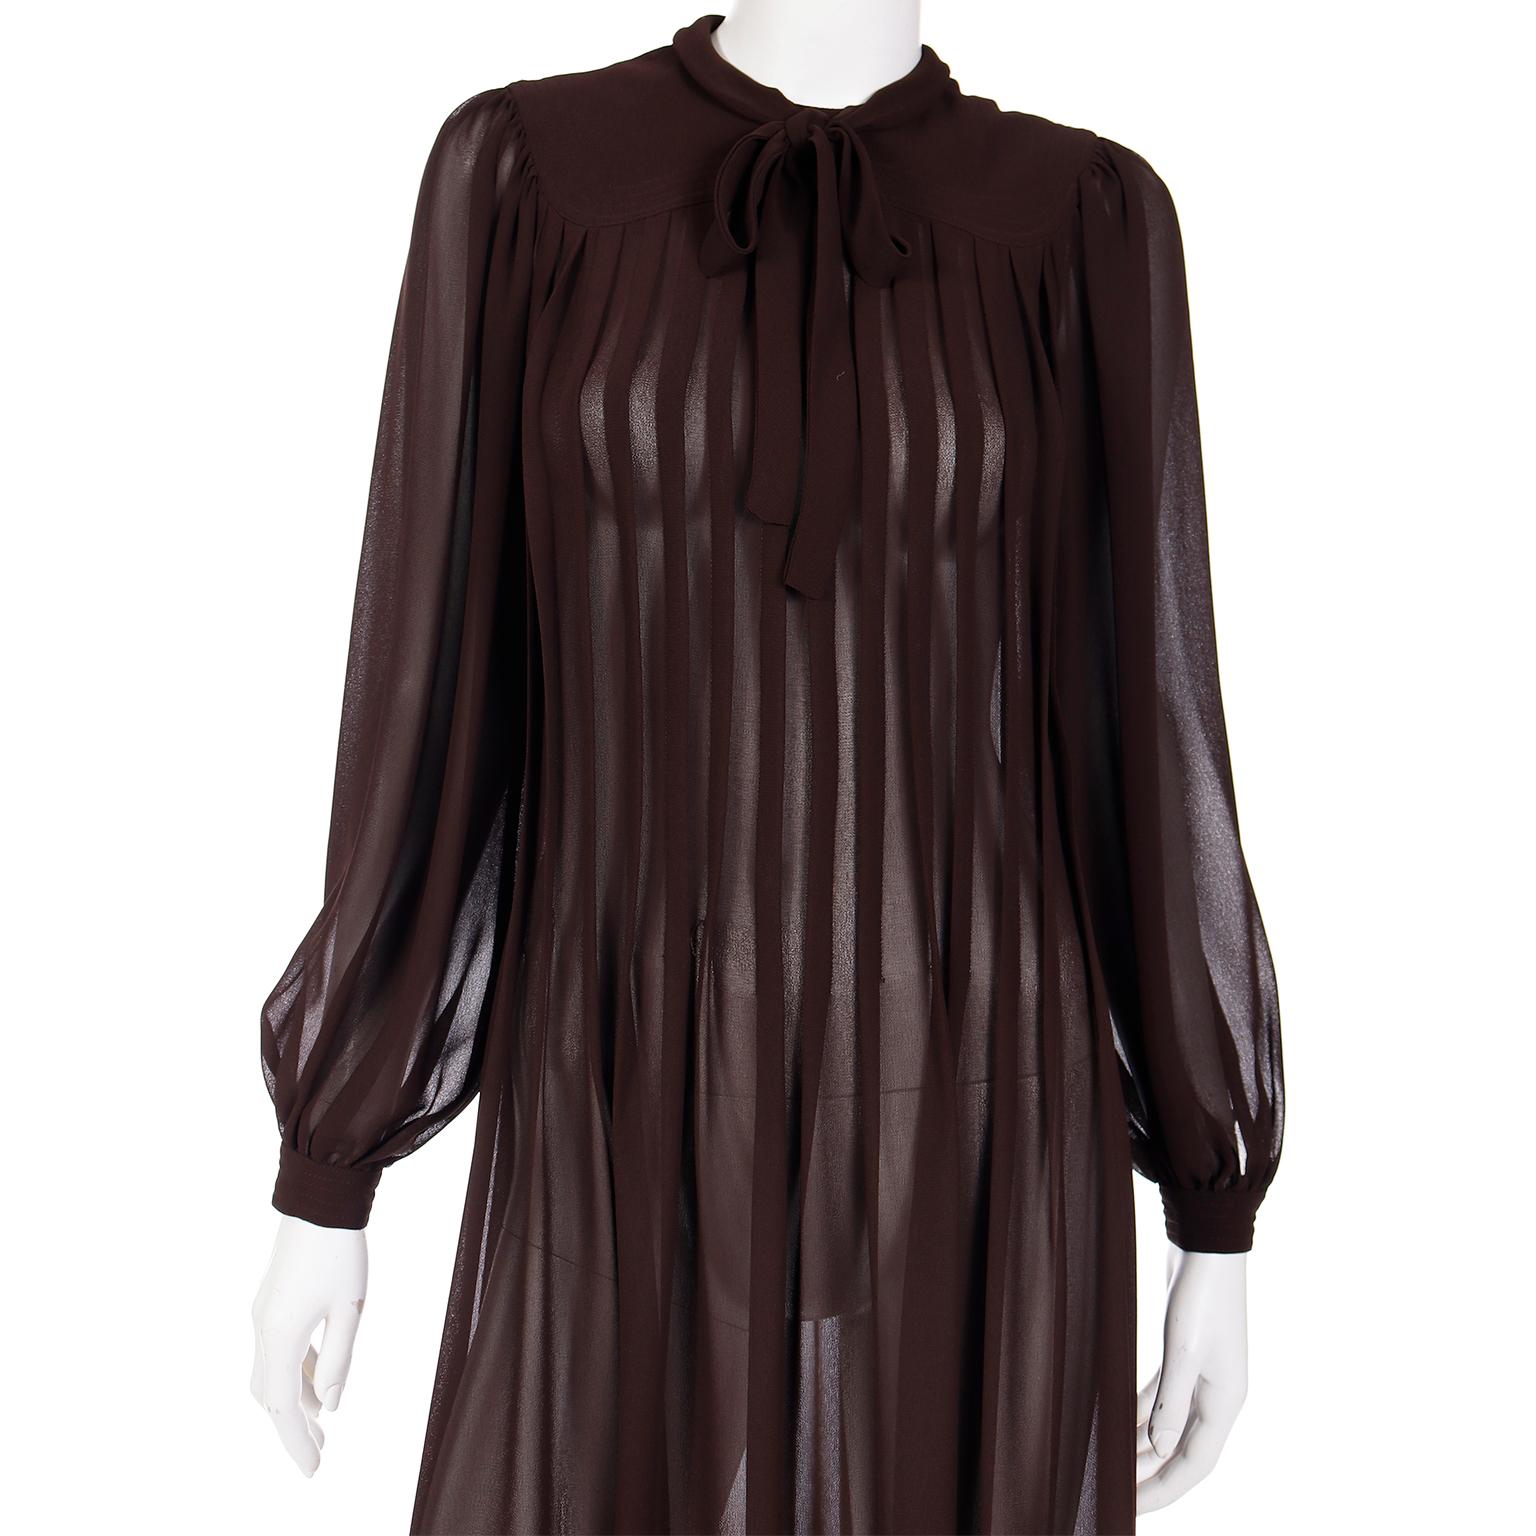 Vintage Albert Nipon 1970s Pleated Brown Semi Sheer Dress With Bow In Excellent Condition For Sale In Portland, OR